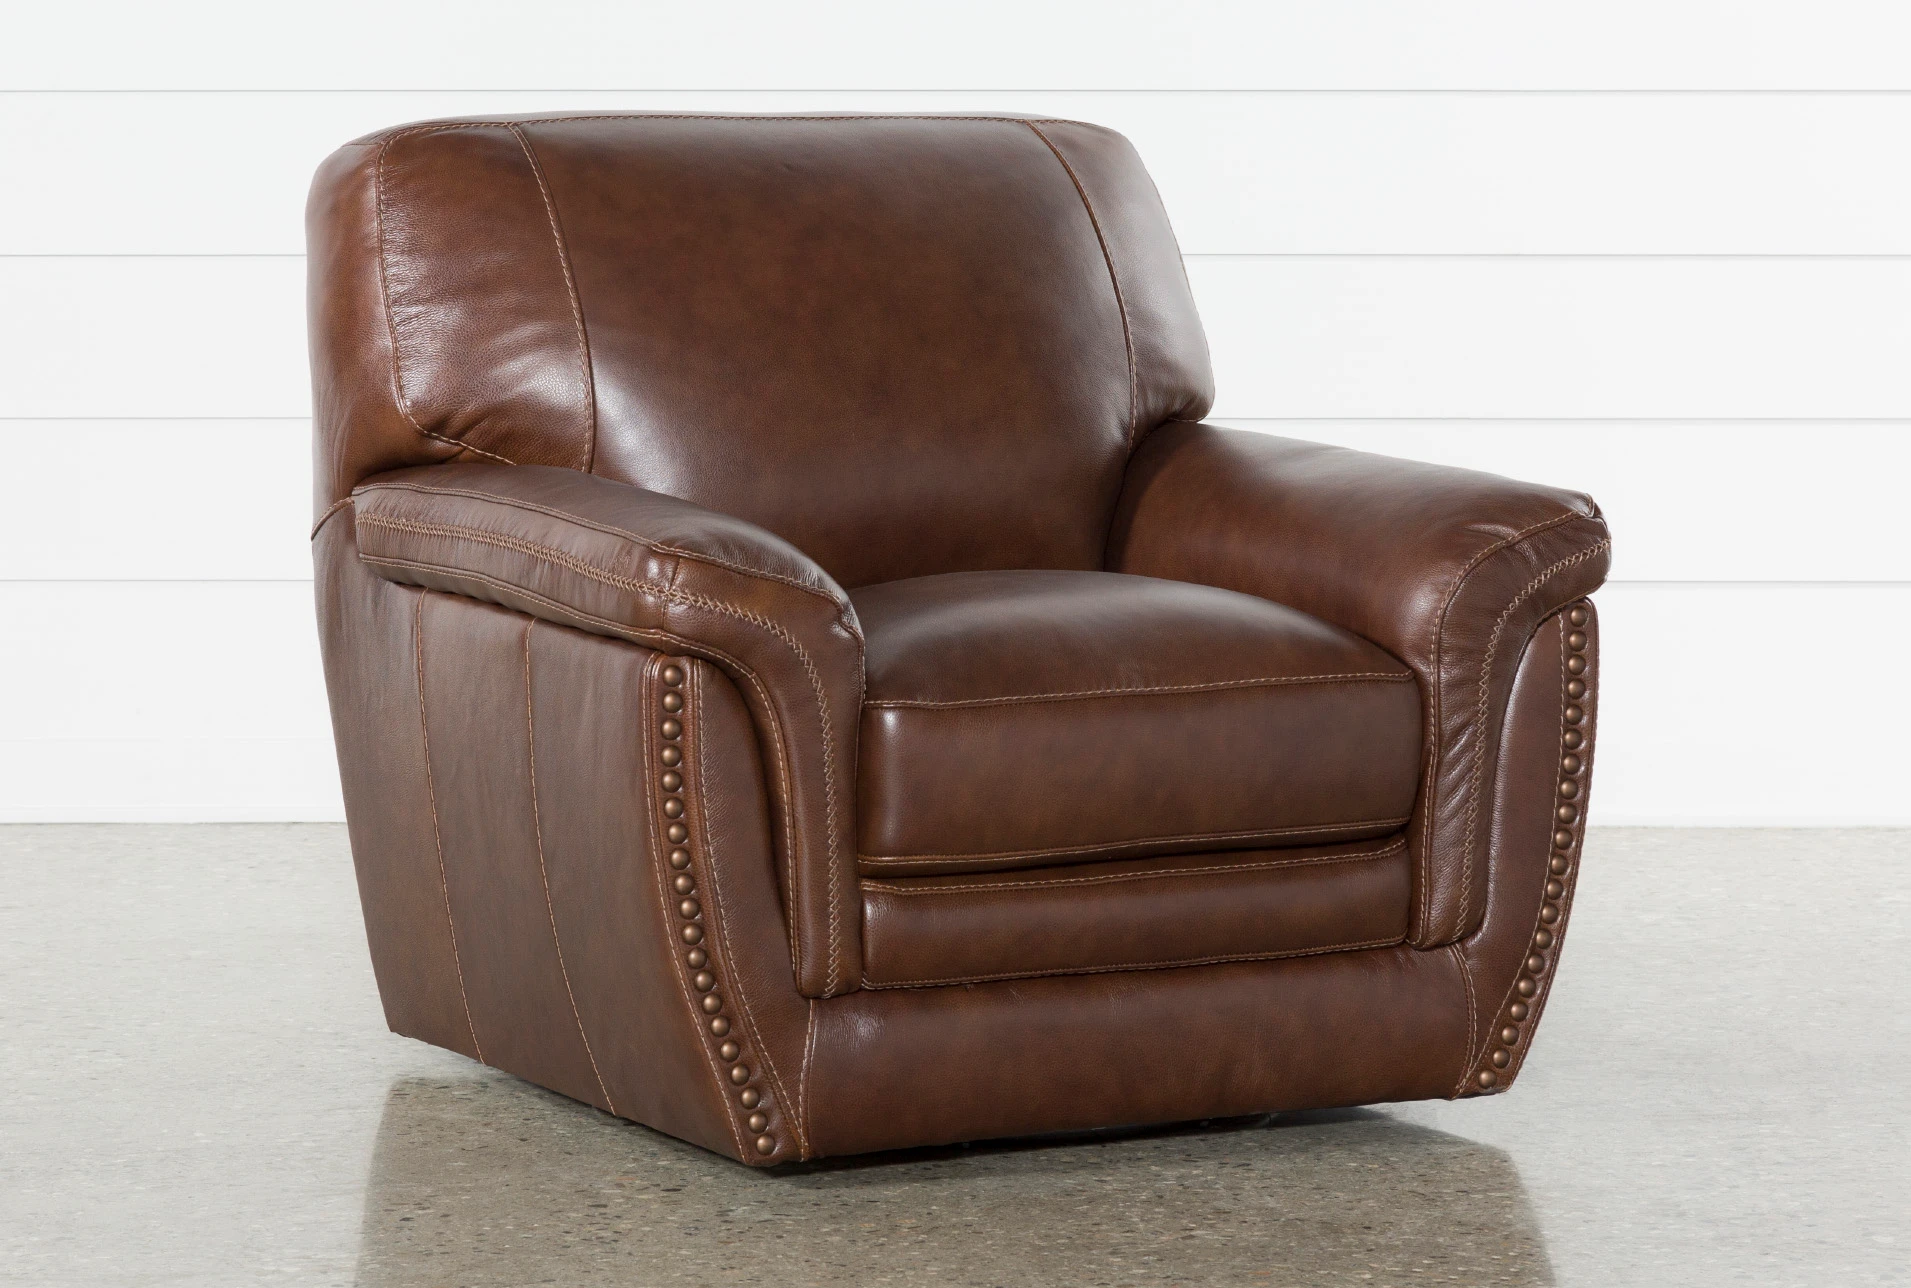 Comfortable Swivel Chair For Living Room